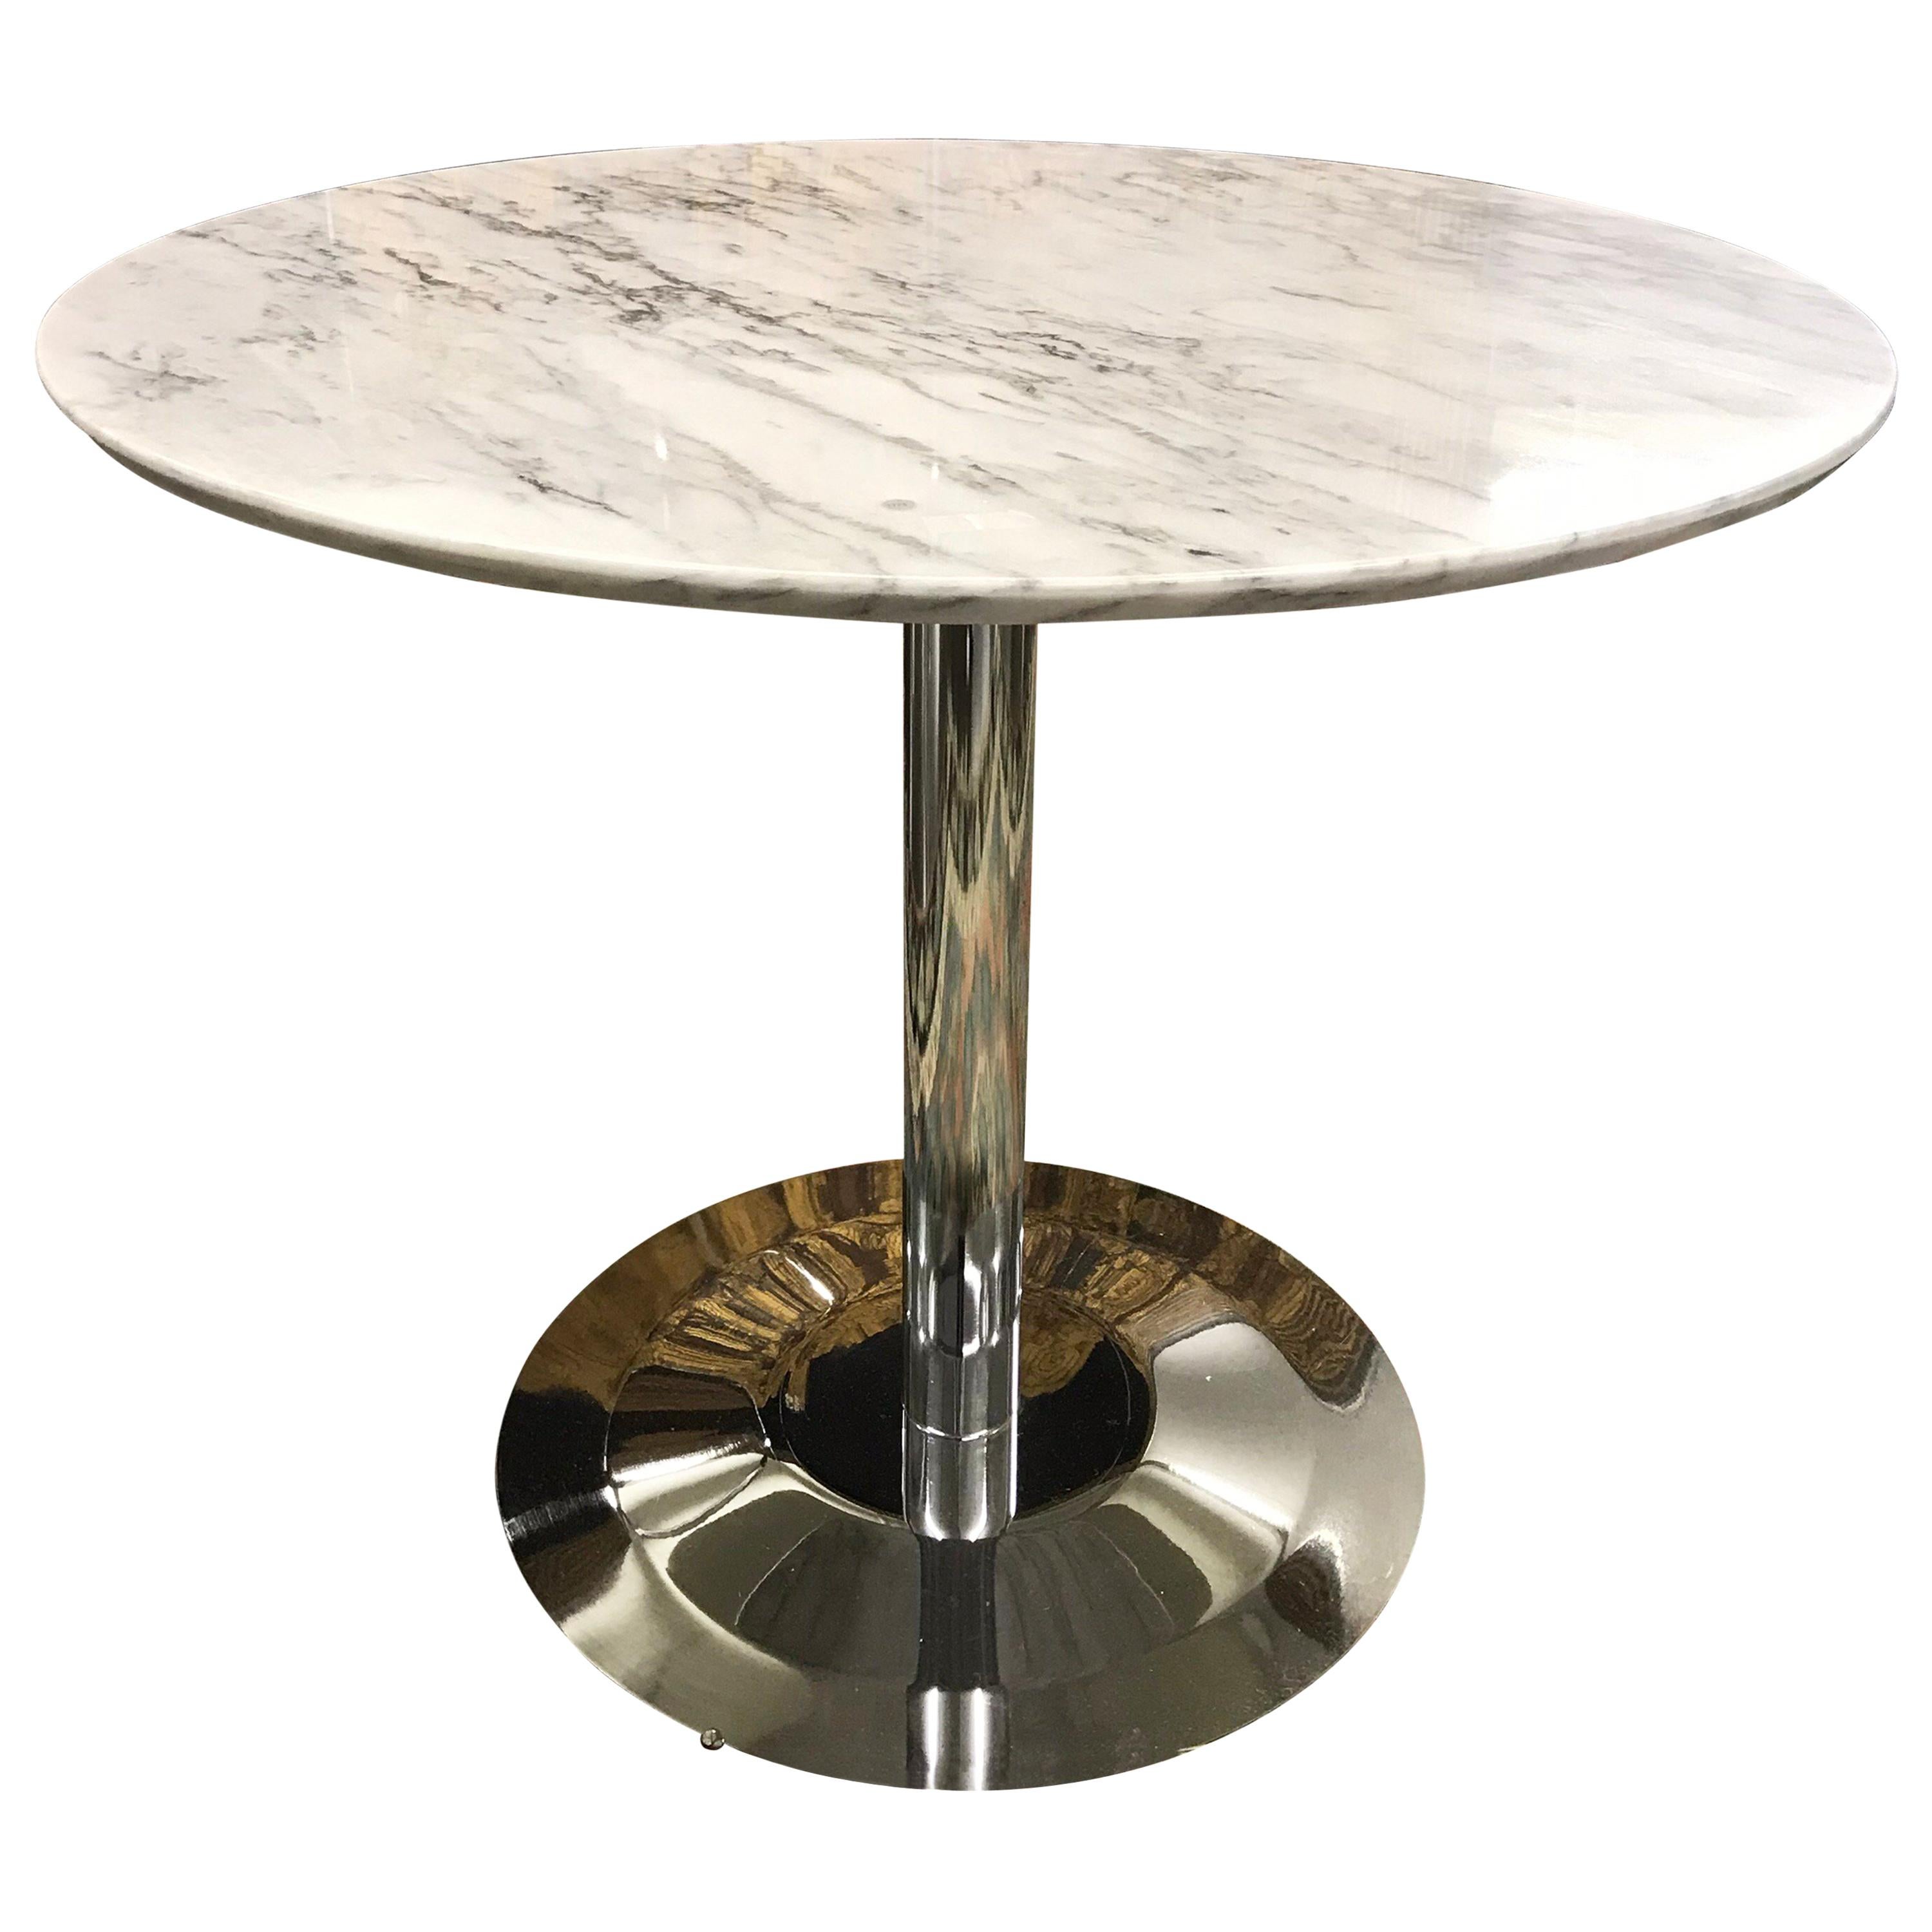 Mid-Century Modern Style Marble and Chrome Pedestal Bistro Tulip Table